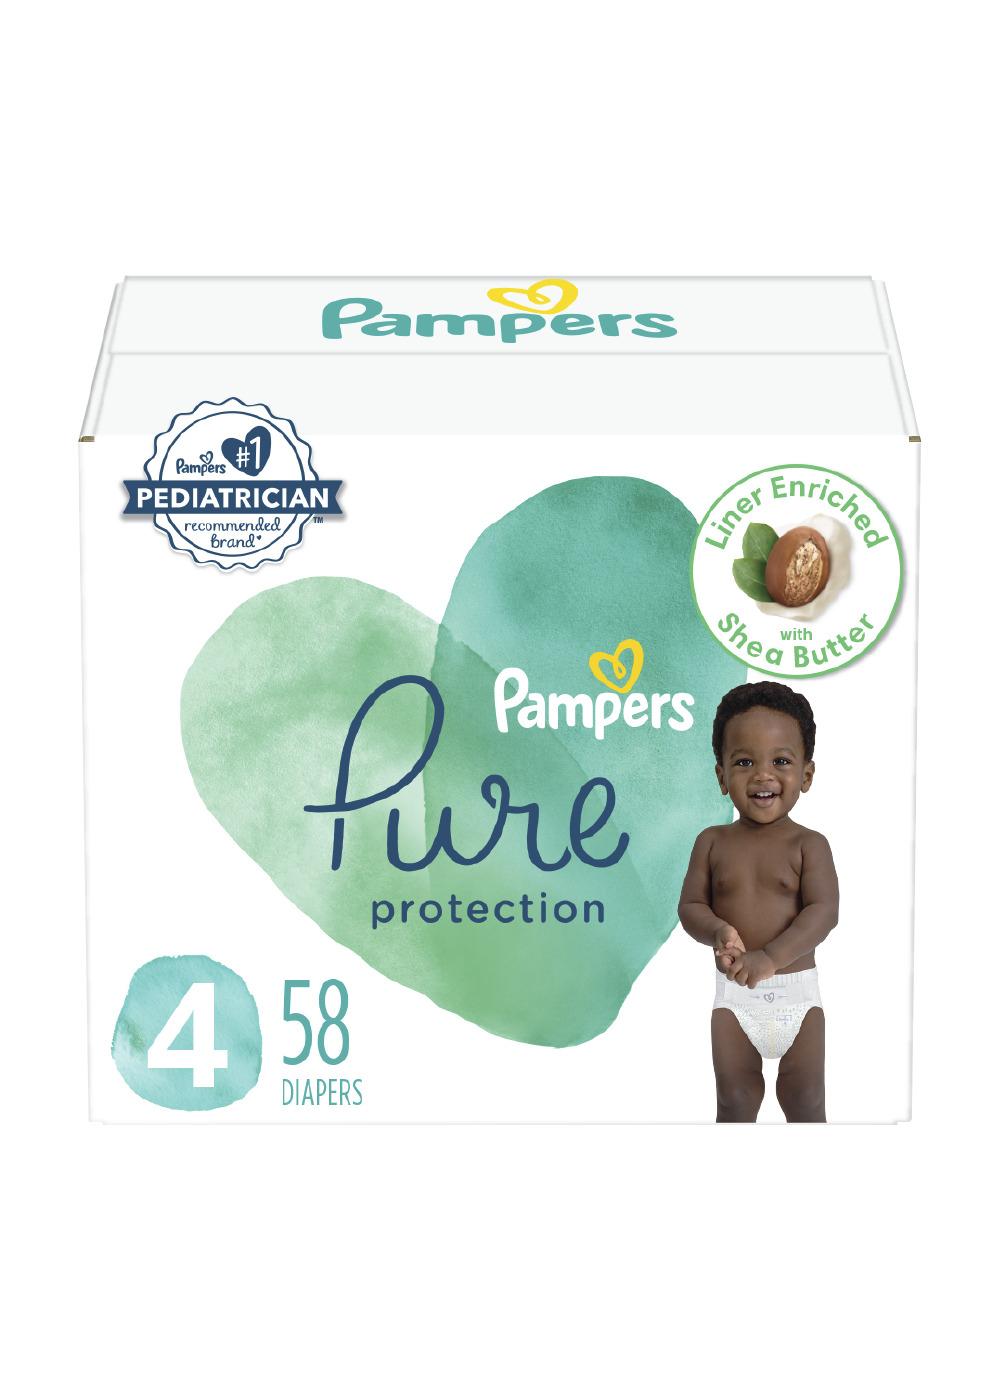 Pampers Pure Protection Diapers - Size 4; image 1 of 11